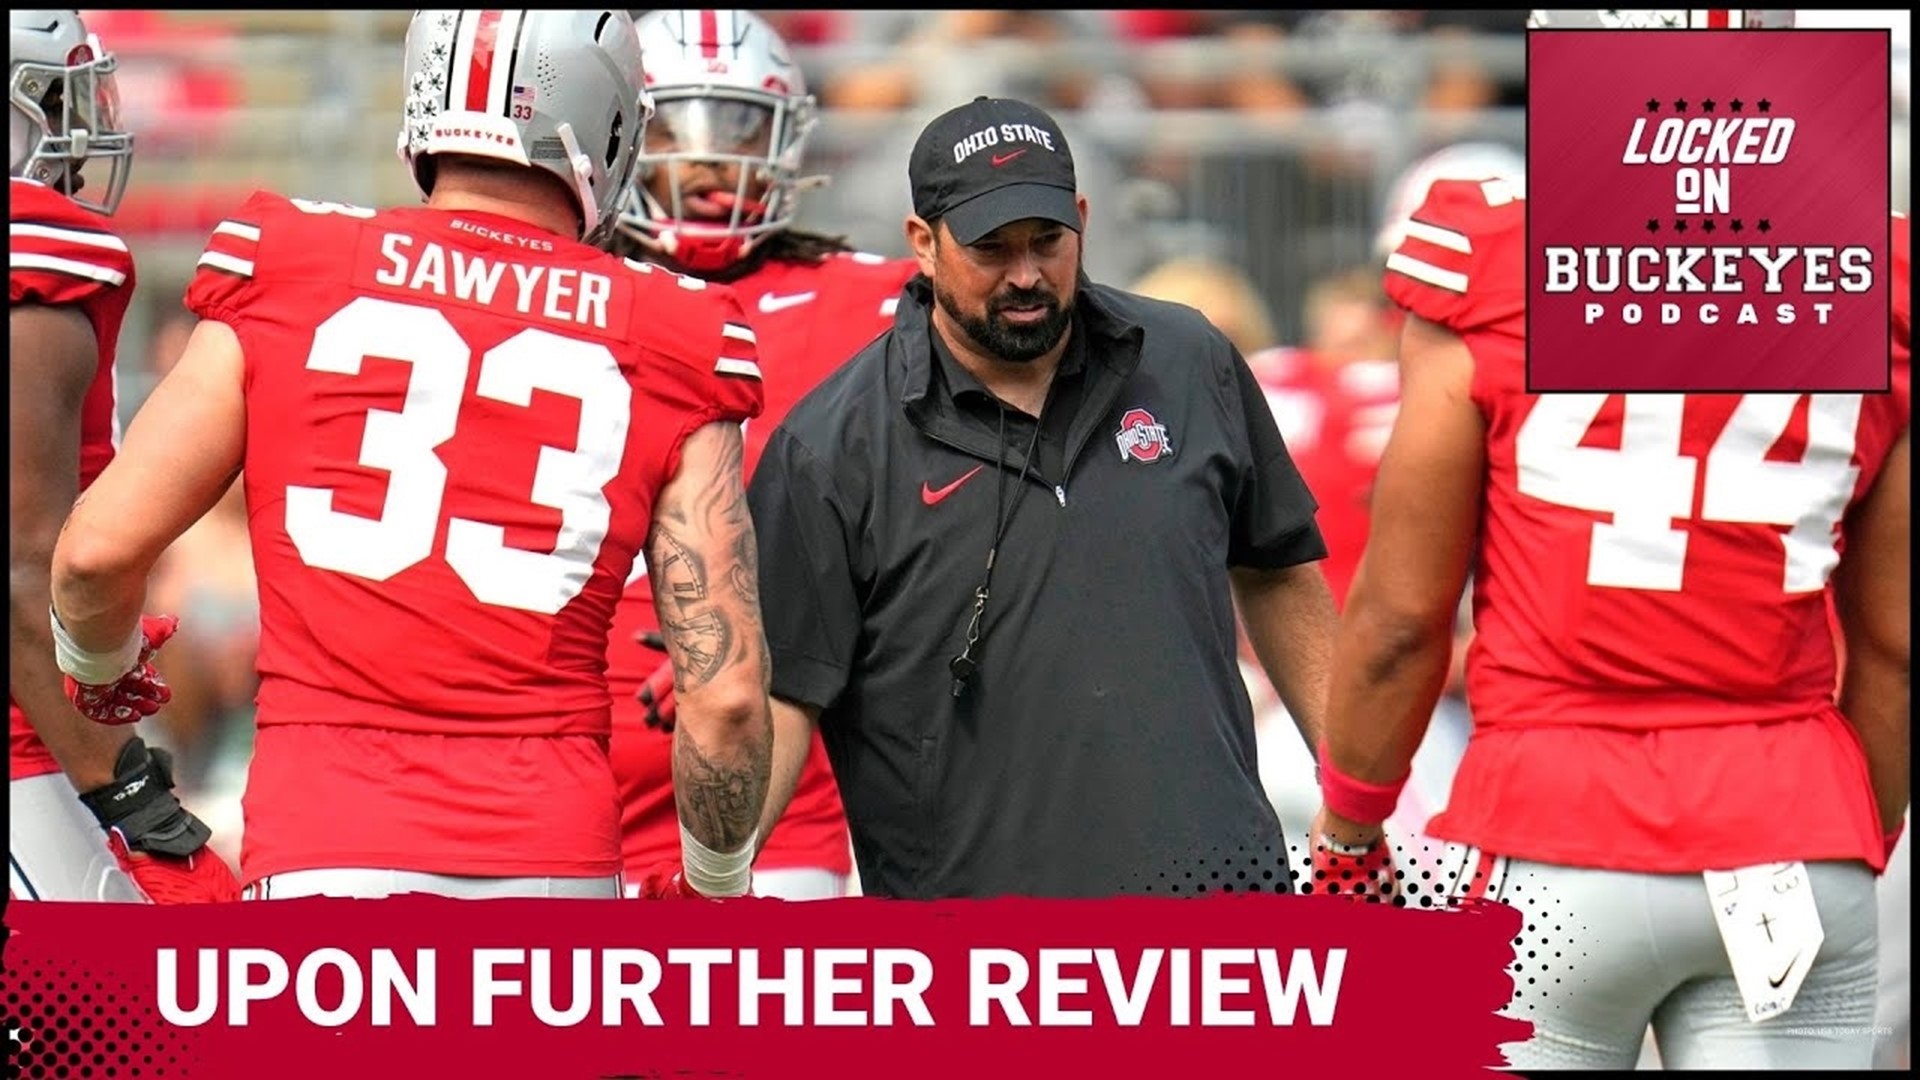 The Ohio State Buckeyes haven't play up to their standard this season.  The outcome of the first two games doesn't describe how abnormal the Buckeyes offense played.